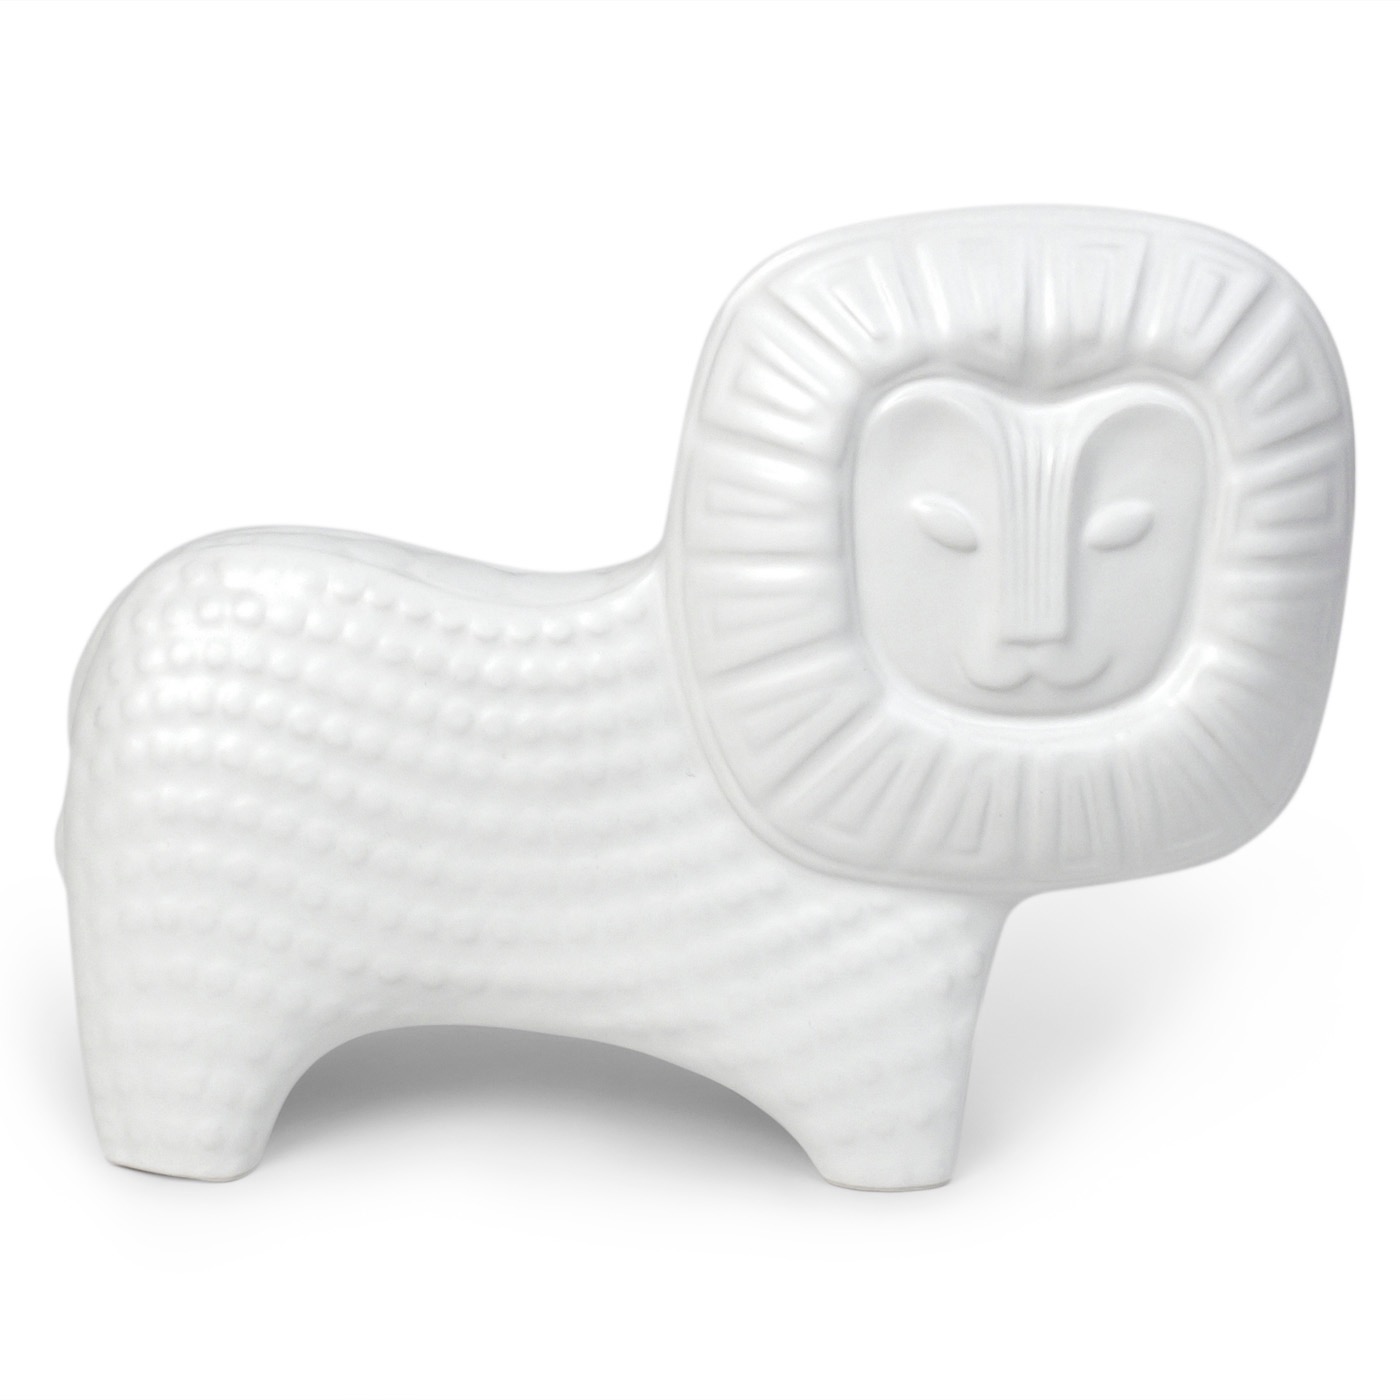 Jonathan Adler Menagerie Collection Lion. You can’t go wrong with JA! Available at the outstanding Outre Gallery. More #Leo and Lion-inspired products on the RSD Blog.